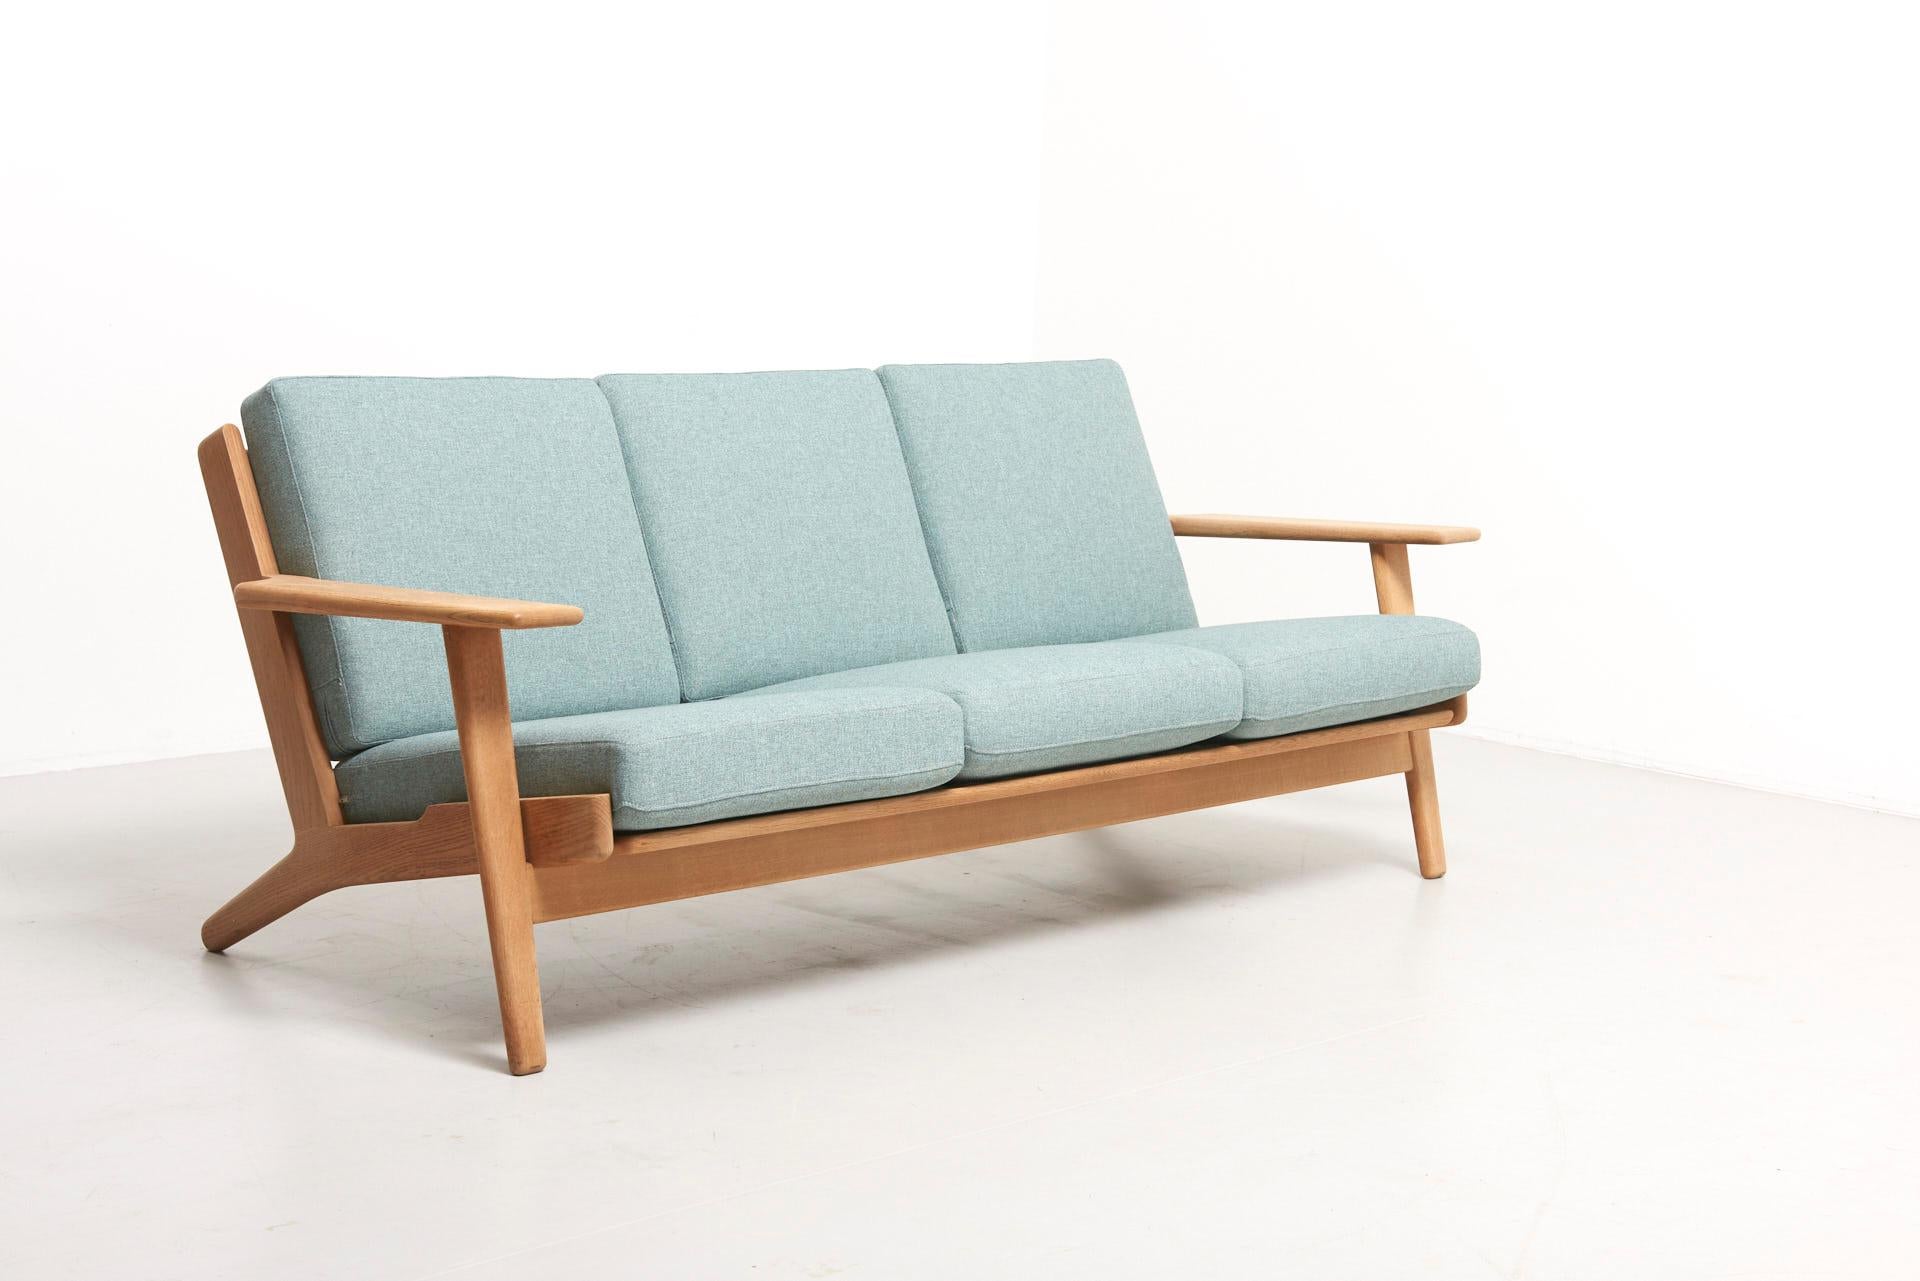 Three-seat sofa designed by Hans J. Wegner in 1953. Model GE-290, produced by GETAMA in Denmark.
Solid oak frame with new cushions upholstered in soft blue felt.
 